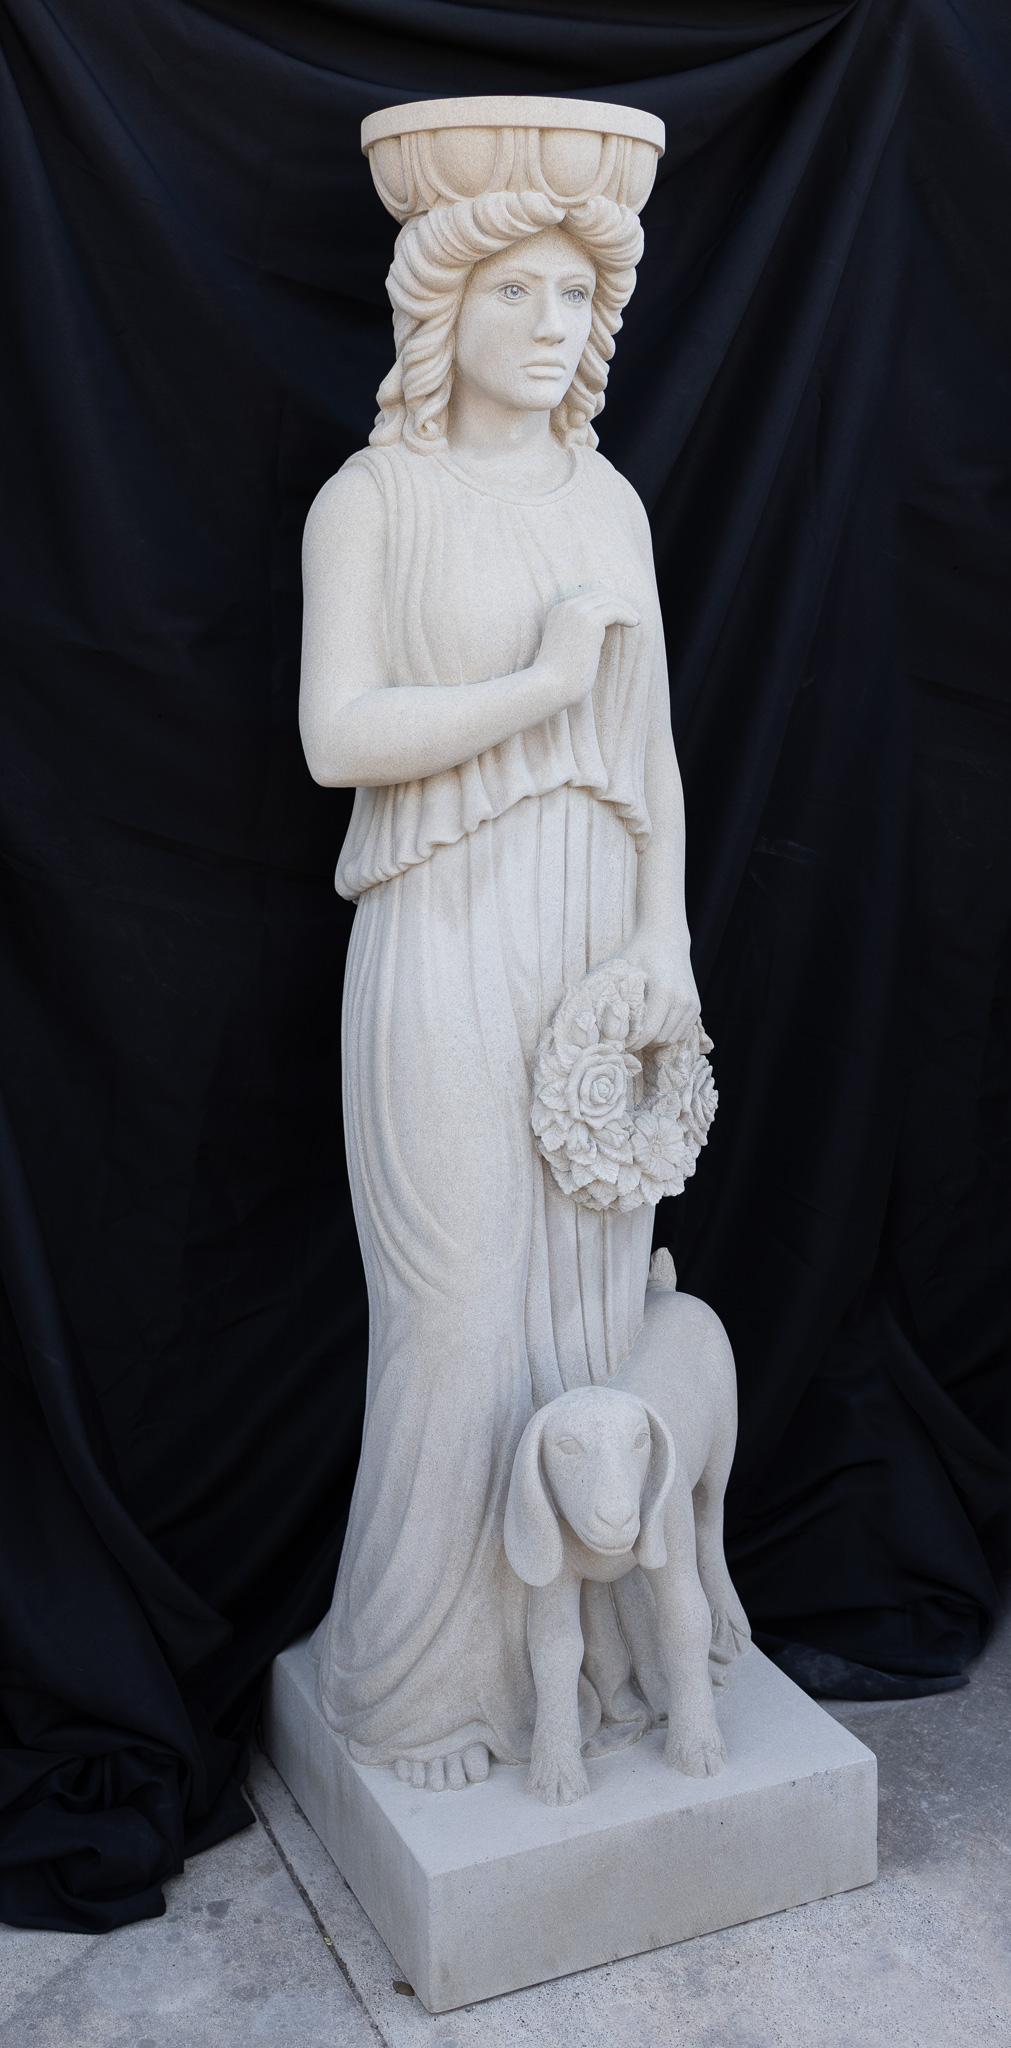 By Bob Ragan
Two Indiana Limestone caryatid sculptures
Dimensions and Weight for each: 73